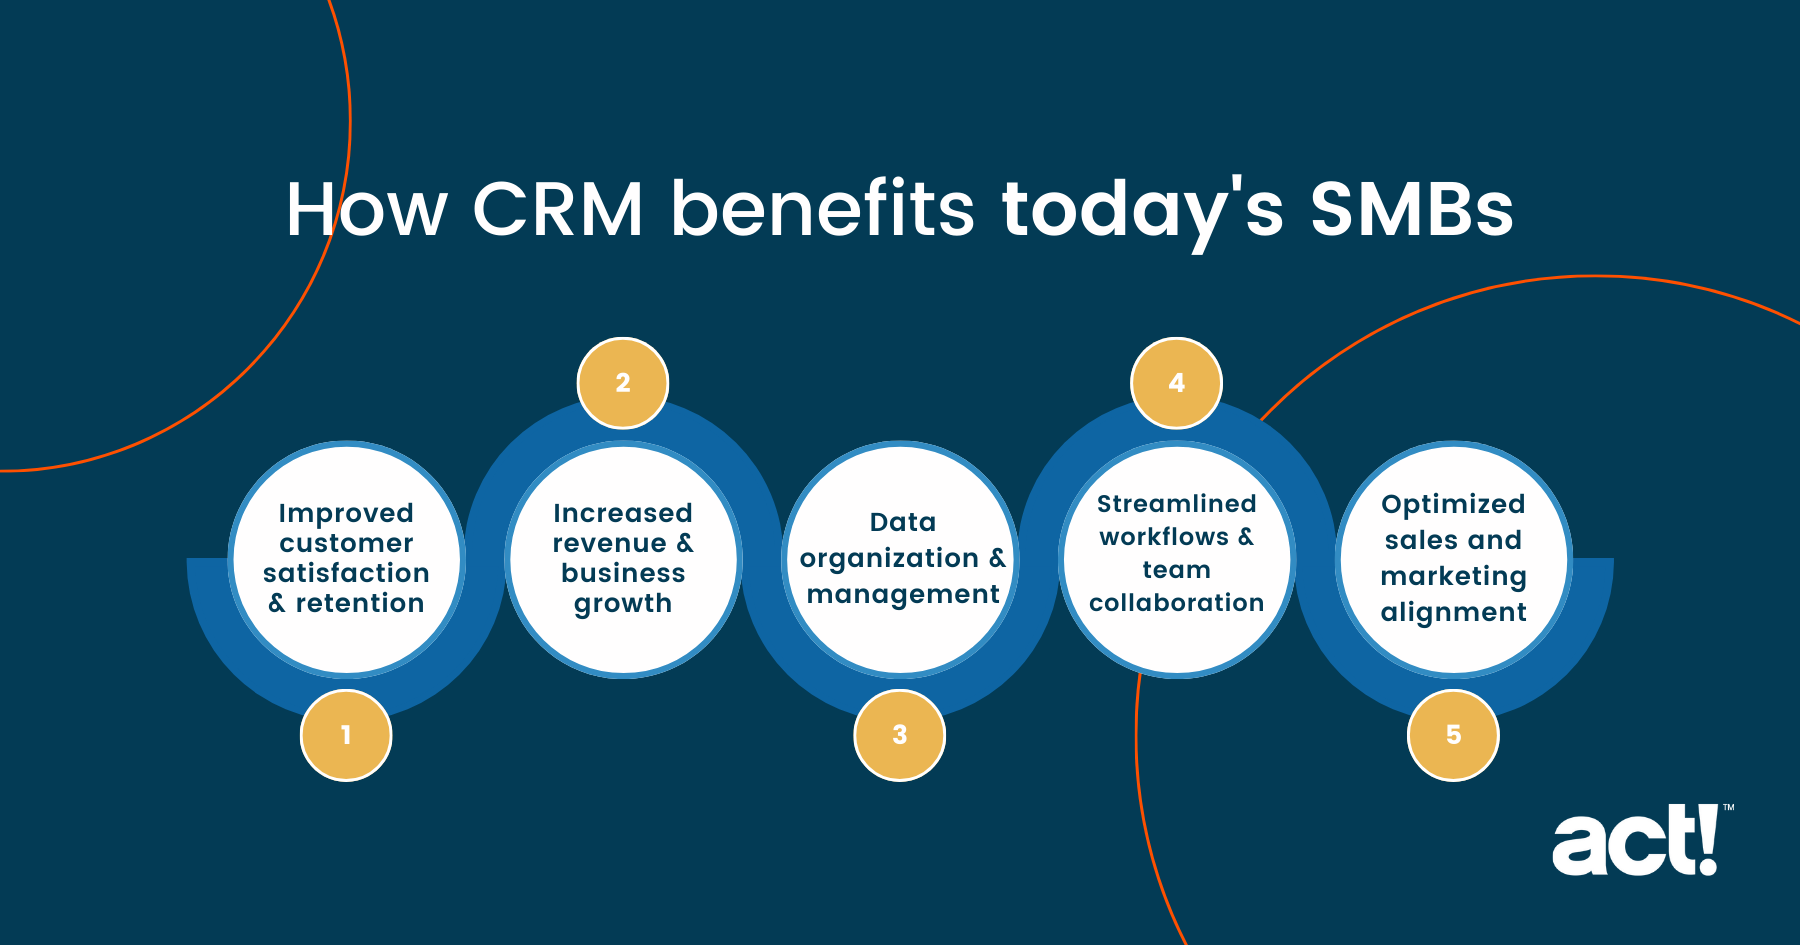 How CRM benefits today's SMBs Improved customer satisfaction & retention Increased revenue & business growth Data organization & management Streamlined workflows & team collaboration Optimized sales and marketing alignment